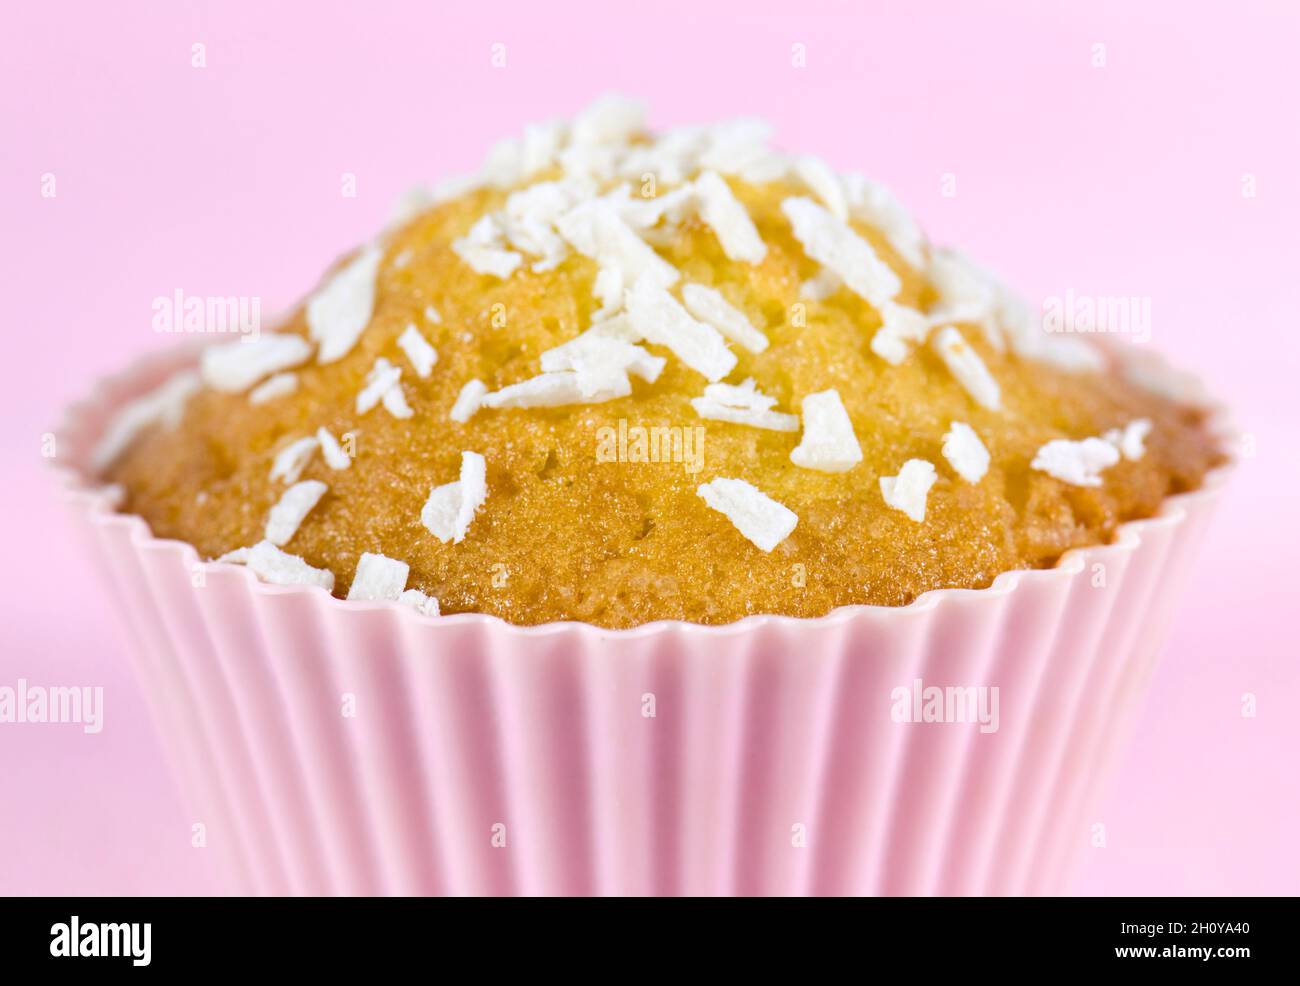 Coconut fairy cake, or cupcake, close up with pink background Stock Photo